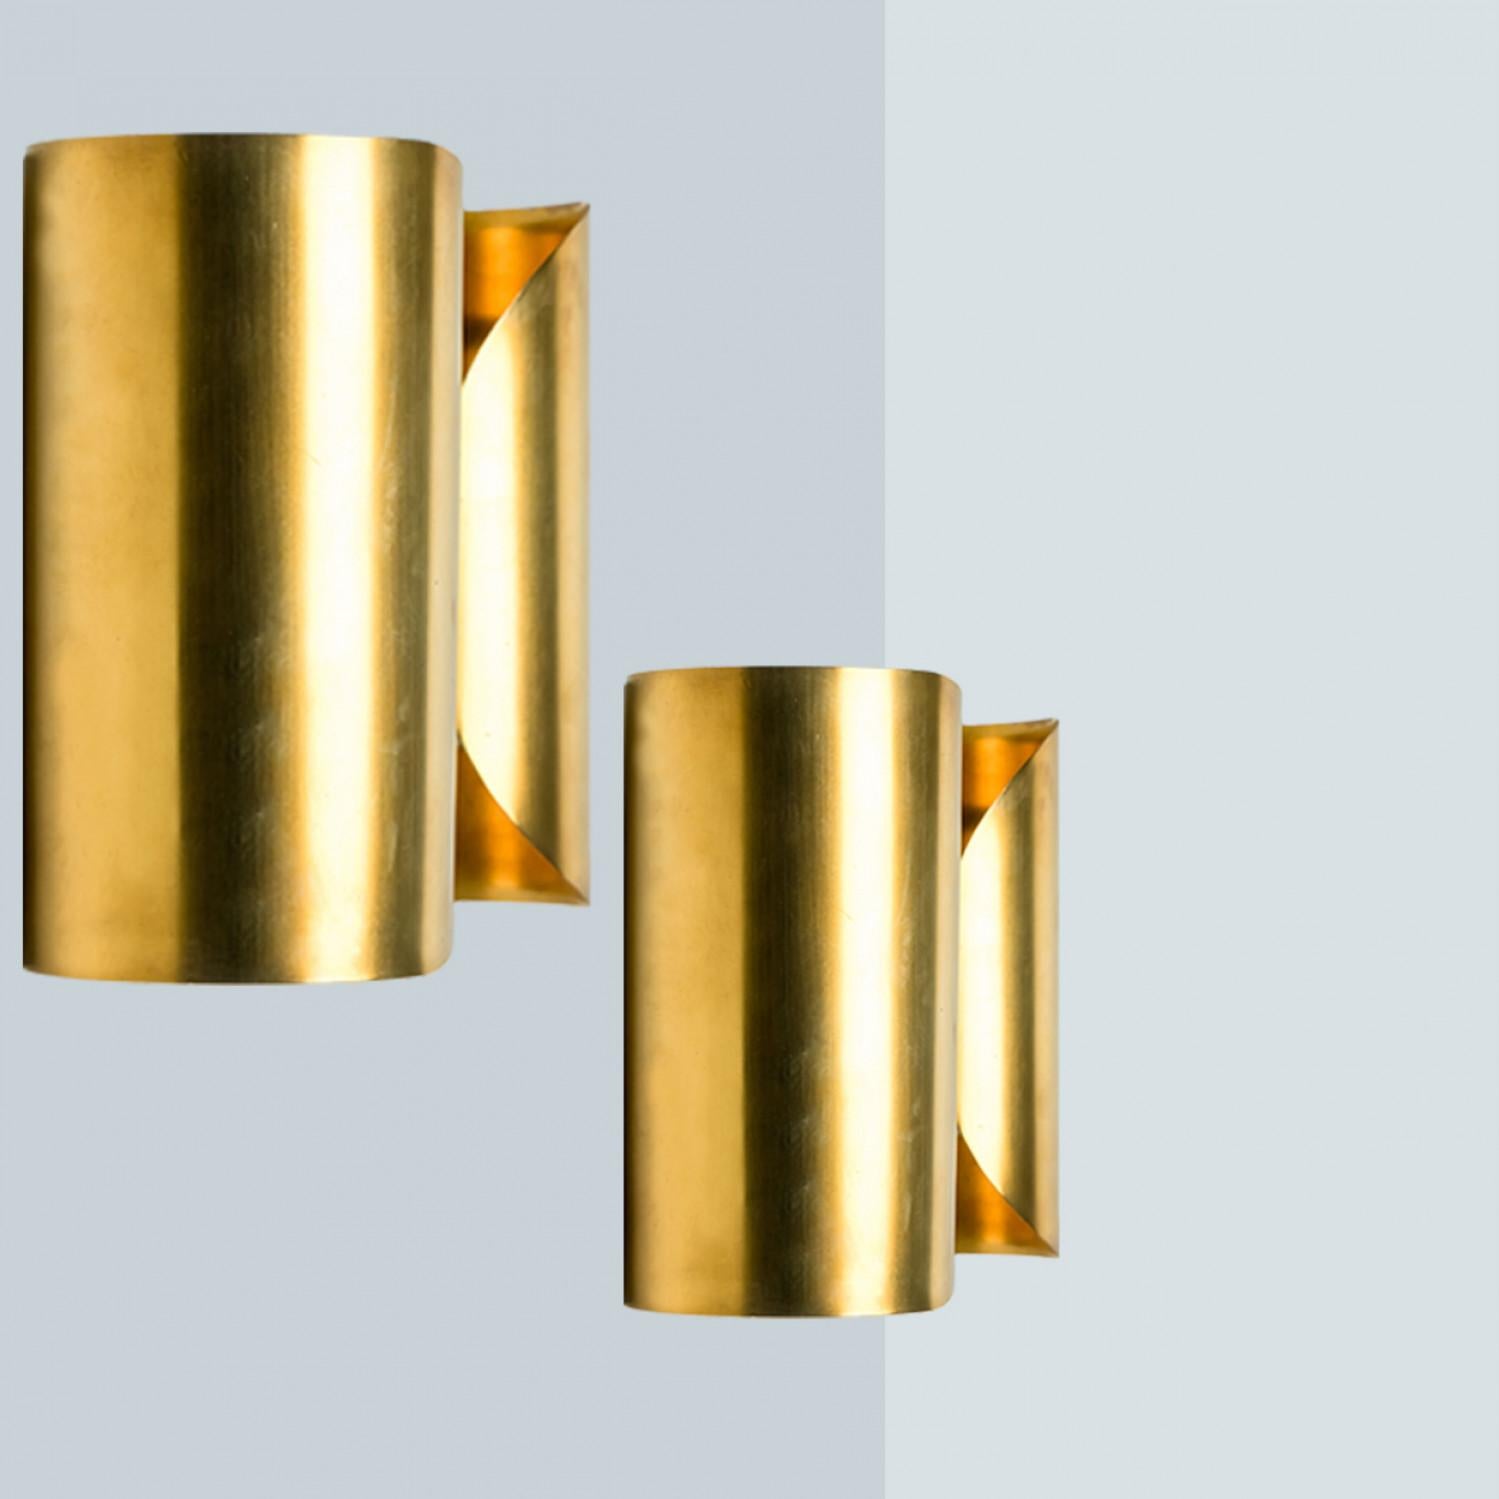 Several Curved Brass Wall Lights, 1970s For Sale 10